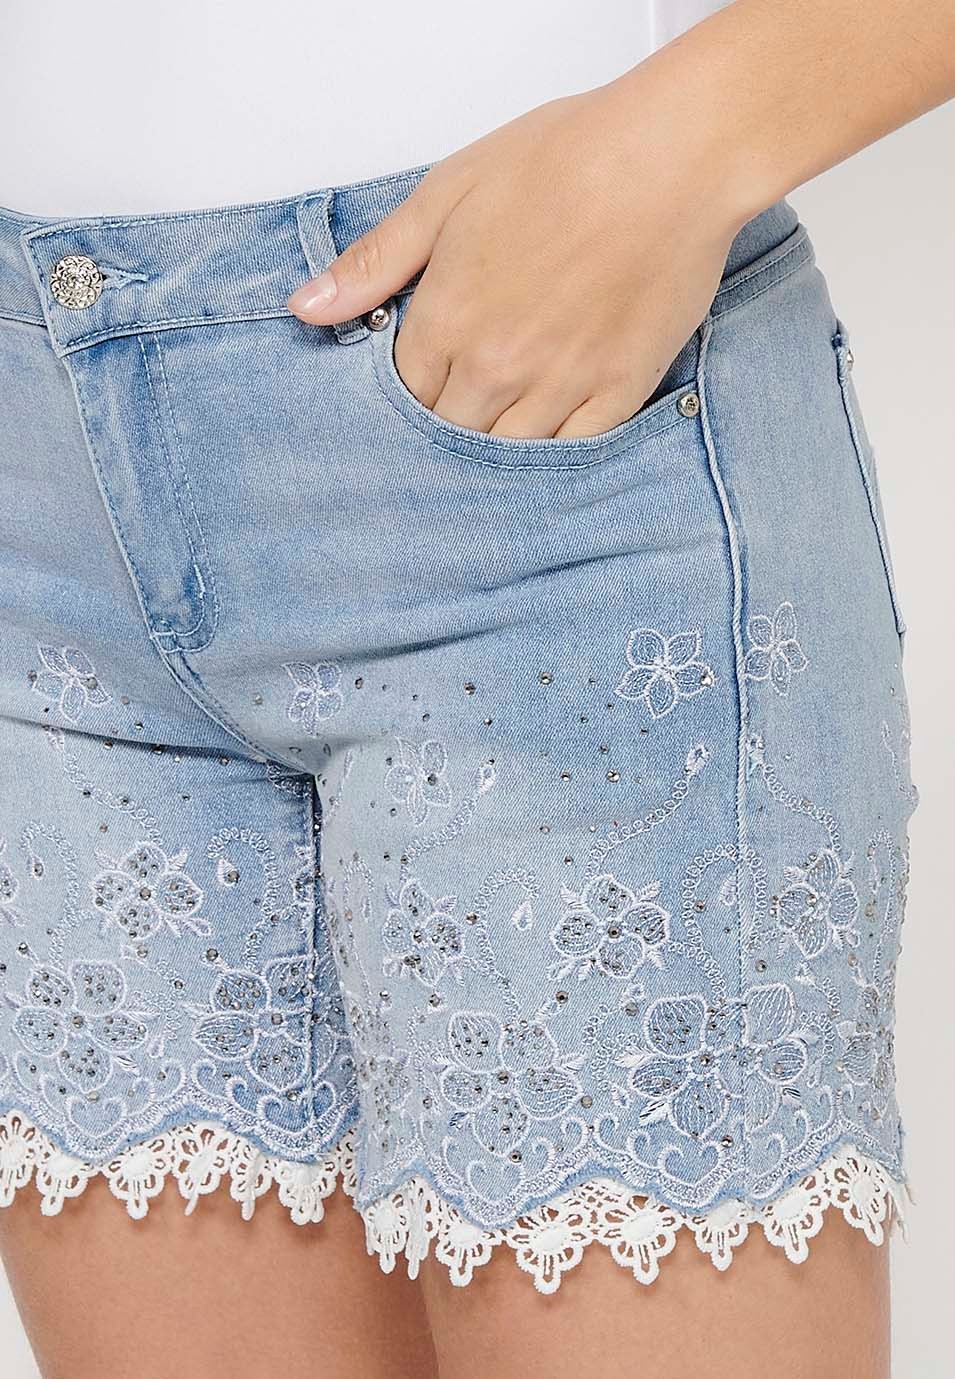 Short denim shorts finished with lace and floral embroidery with front closure with zipper and button with removable bow detail in Blue for Women 9